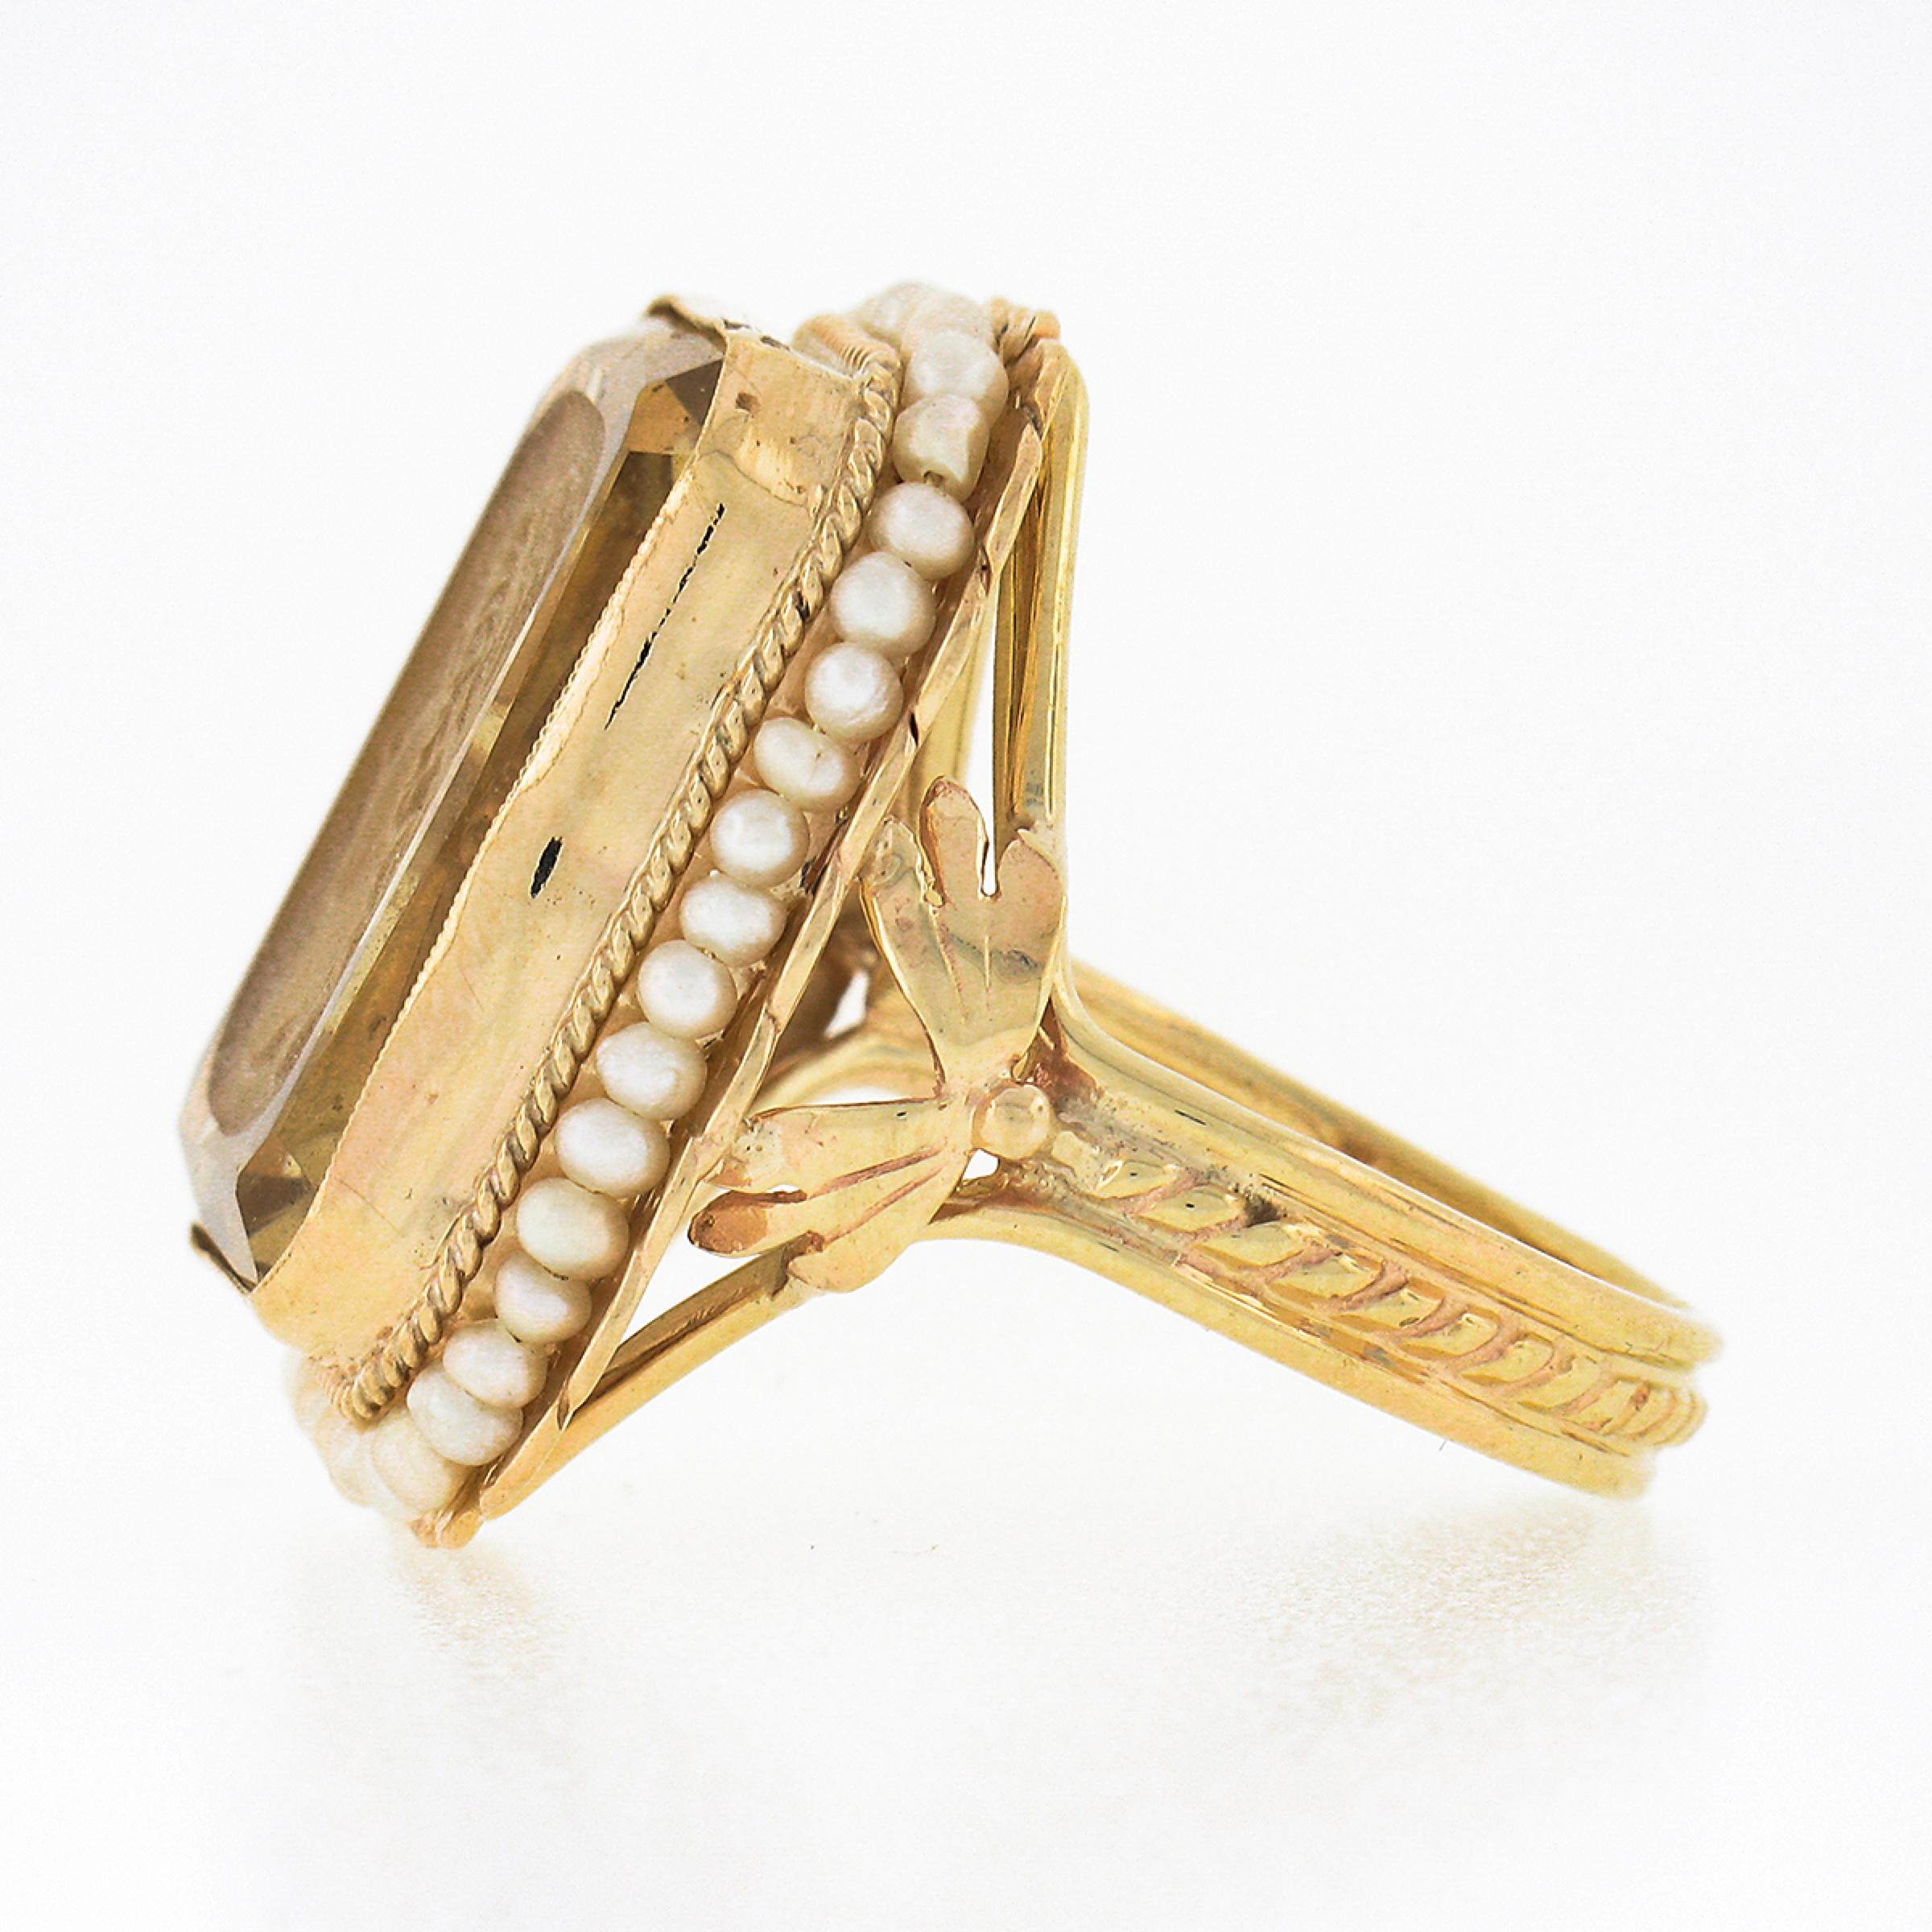 Vintage 14K Gold Rectangular Carved Citrine Intaglio Cameo Seed Pearl Halo Ring For Sale 1